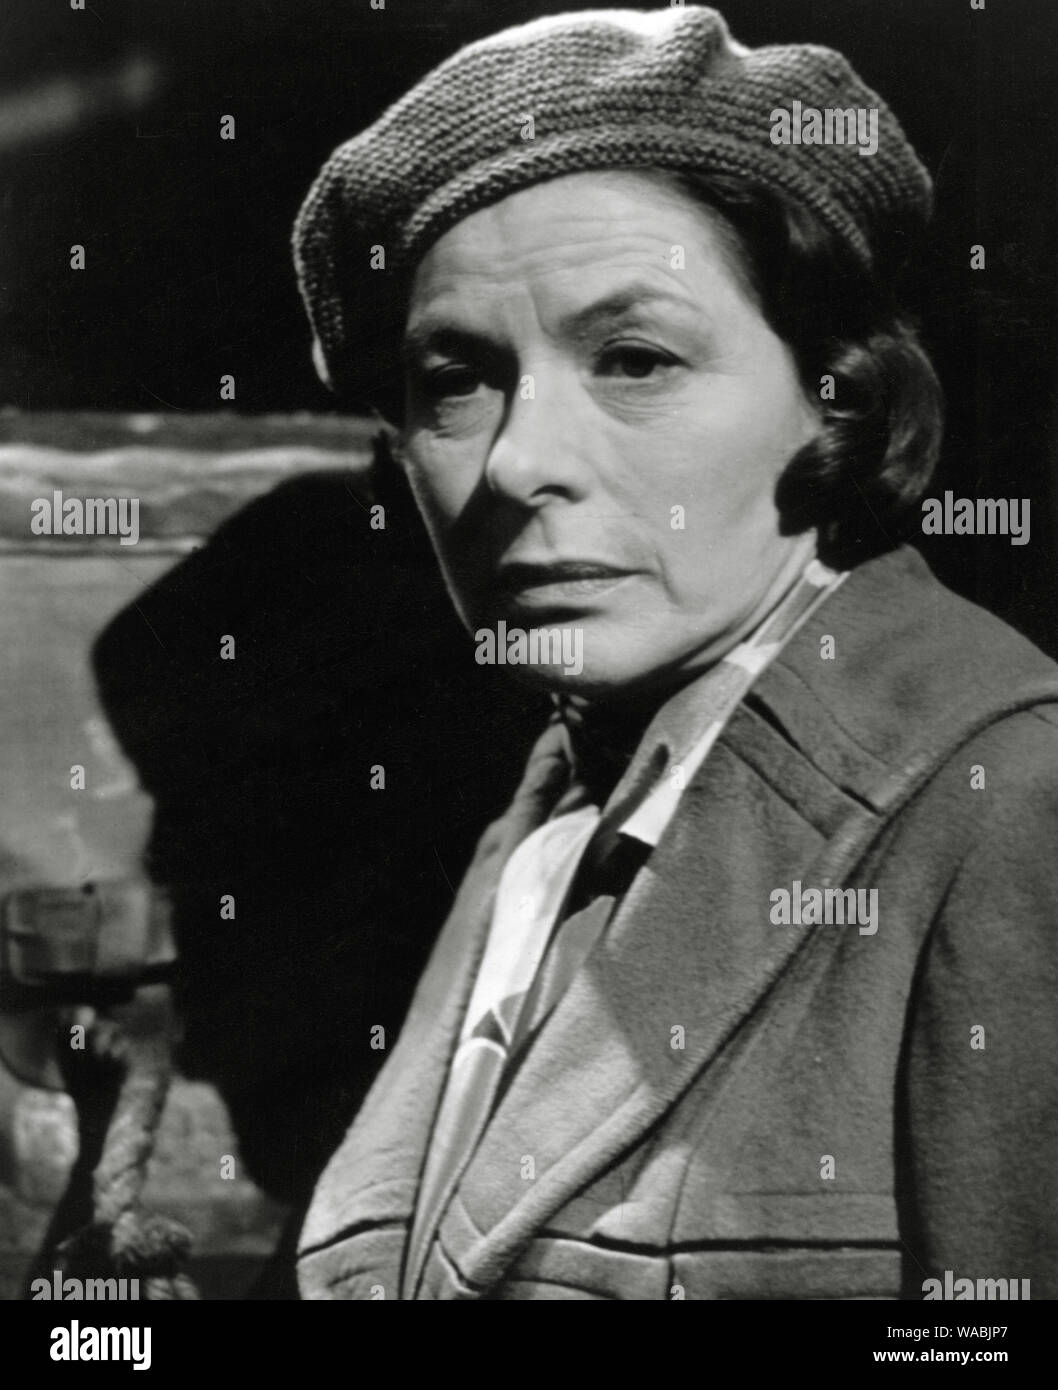 Ingrid Bergman, 'Murder on the Orient Express' (1974) Paramount Pictures    File Reference # 33848-138THA Stock Photo